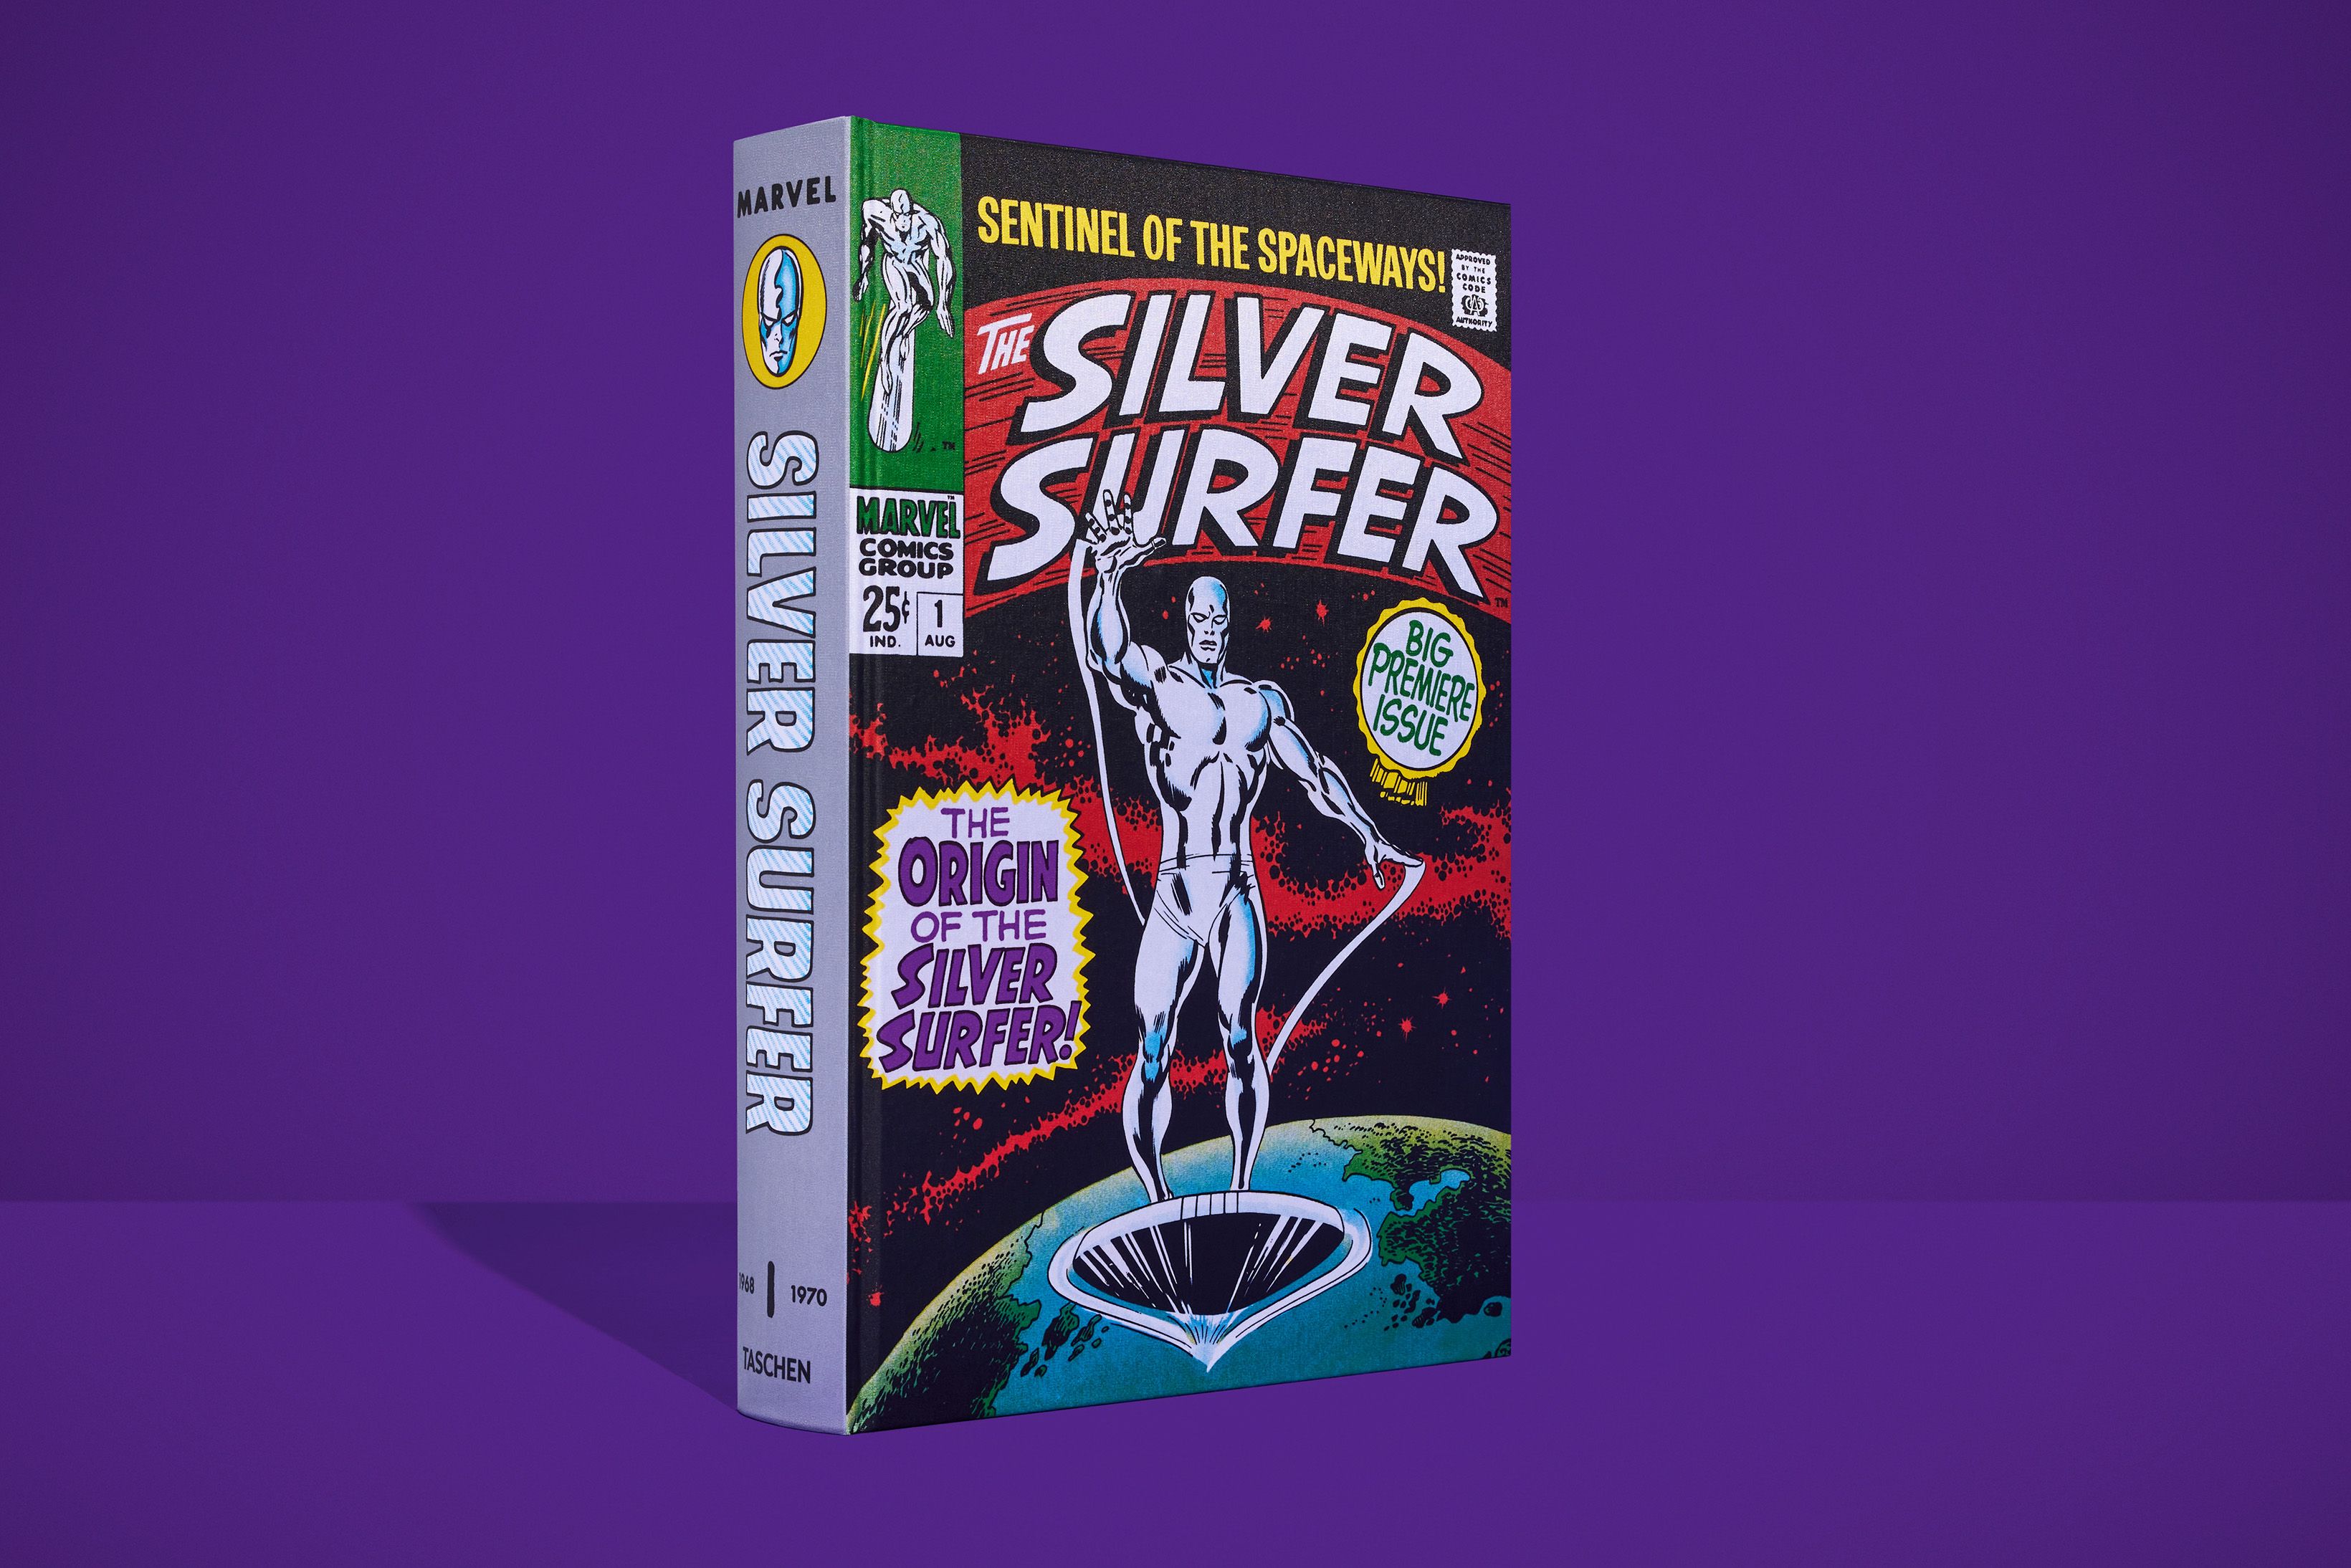 Ghost Light #2: Silver Surfer Review - But Why Tho?